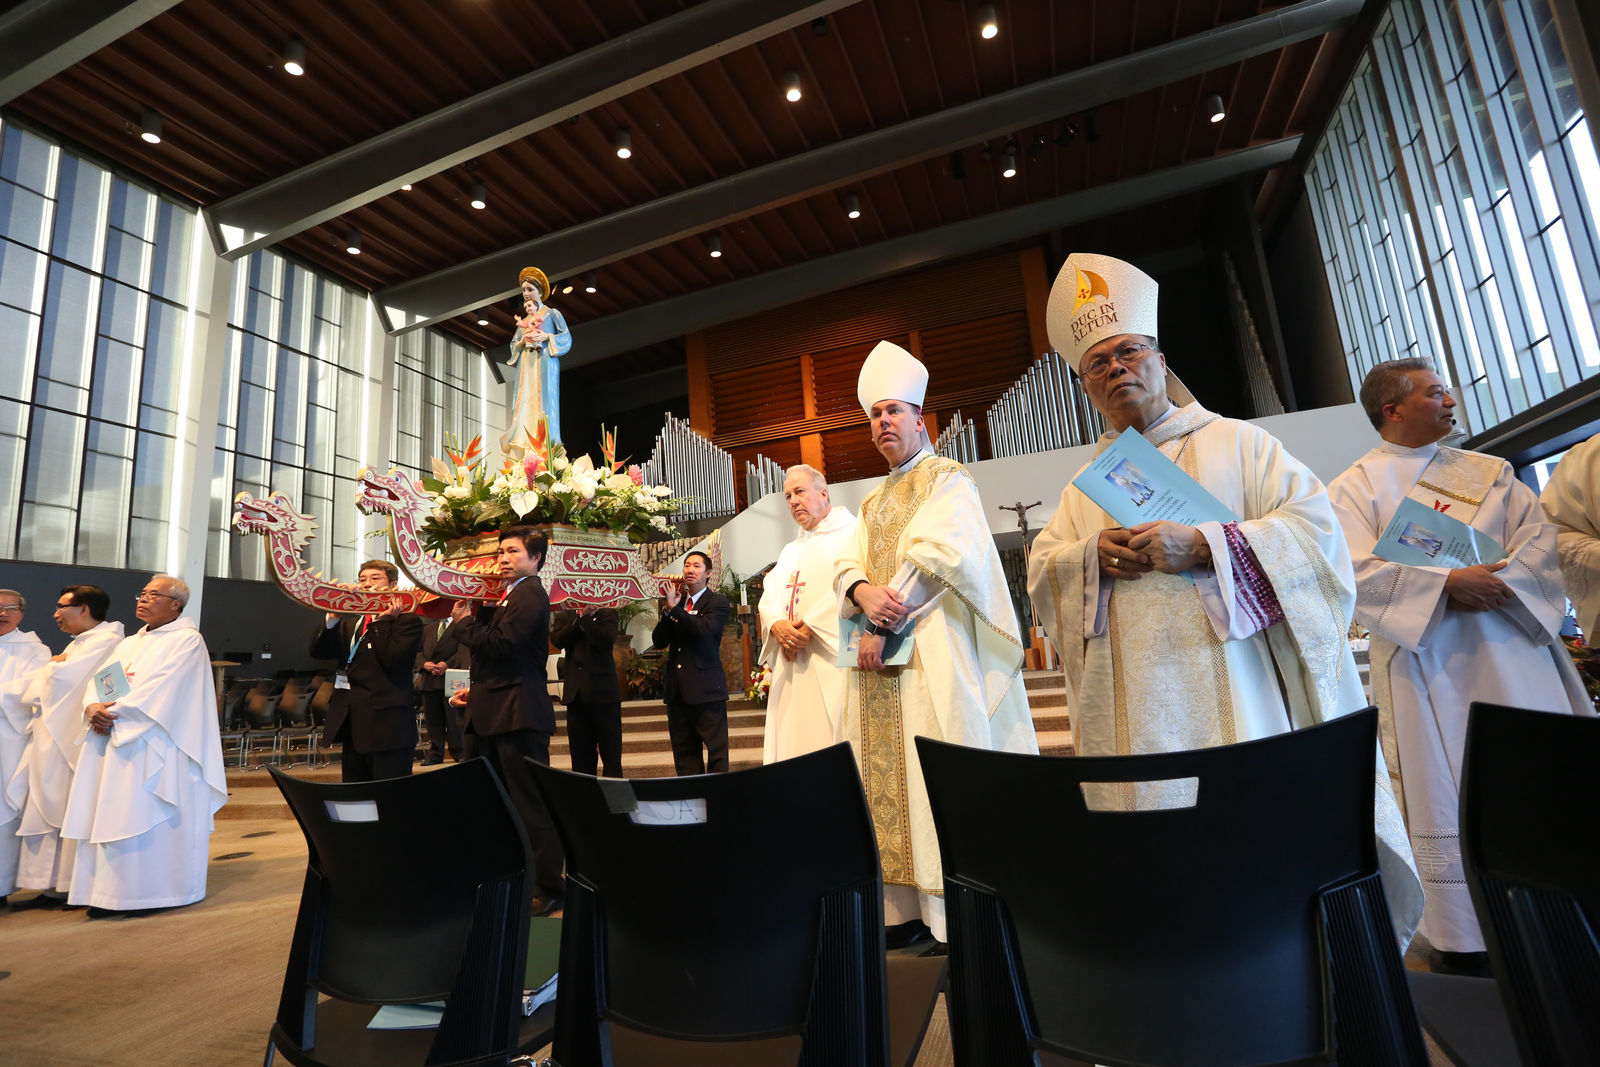 On Saturday, Oct. 21, 2017, approximately 3,000 faithful gathered on Christ Cathedral Campus for the blessing of the site of the future Our Lady of La Vang Shrine. Photo courtesy Diocese of Orange.